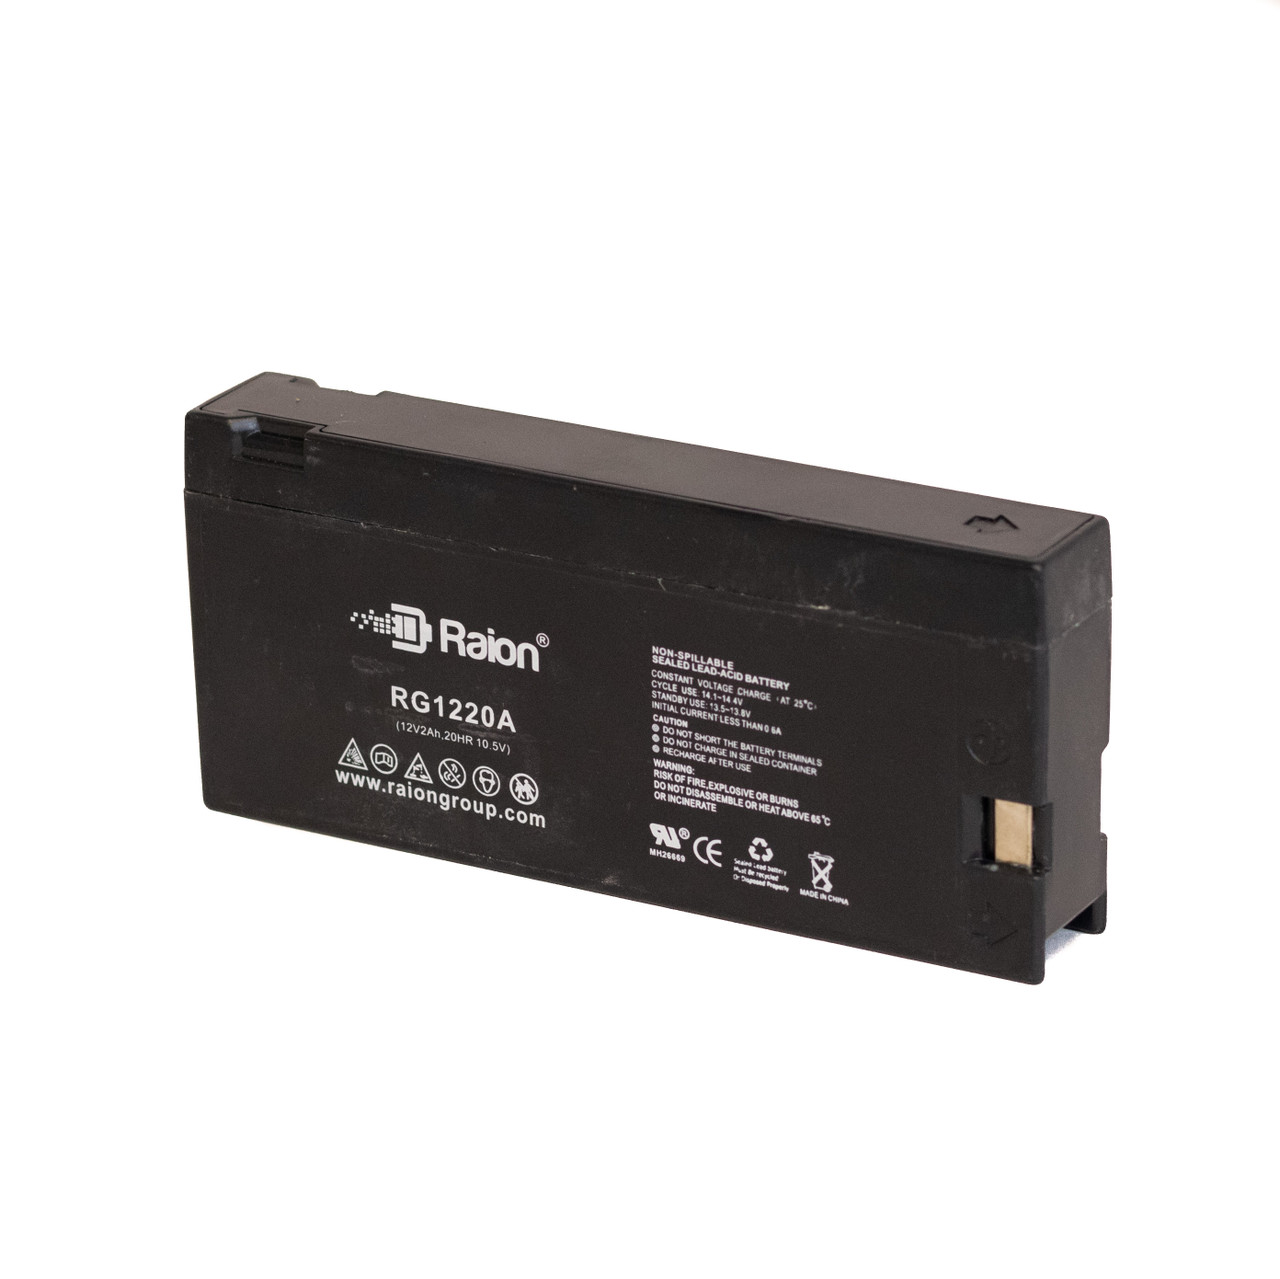 Raion Power RG1220A Replacement Battery for JC Penney 855-8520